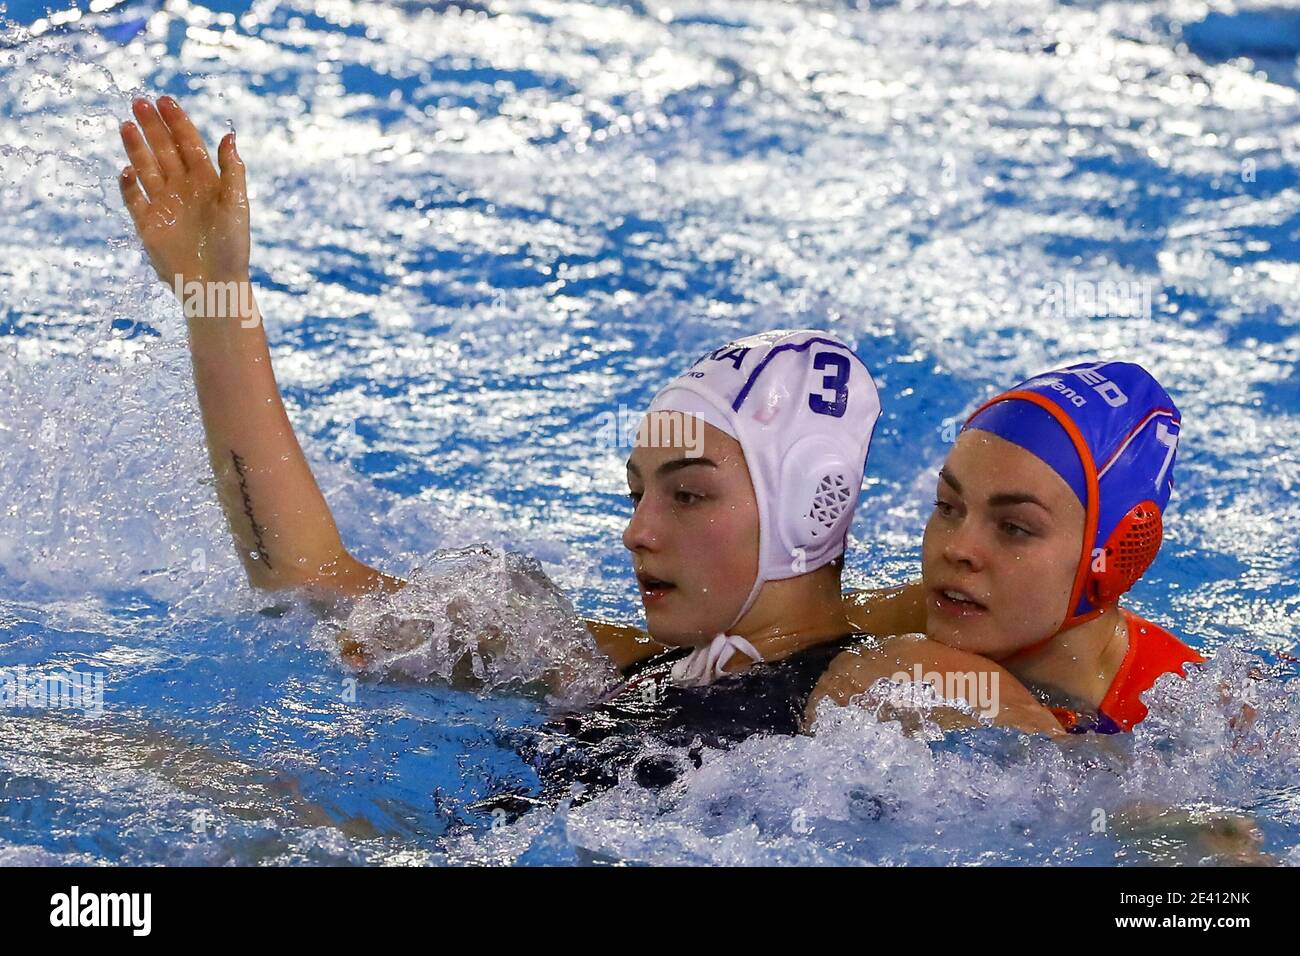 TRIESTE, ITALY - JANUARY 21: Gabrielle Marie, Bente Rogge of Netherlands during the match between France and The Netherlands at Women's Water Polo Oly Stock Photo